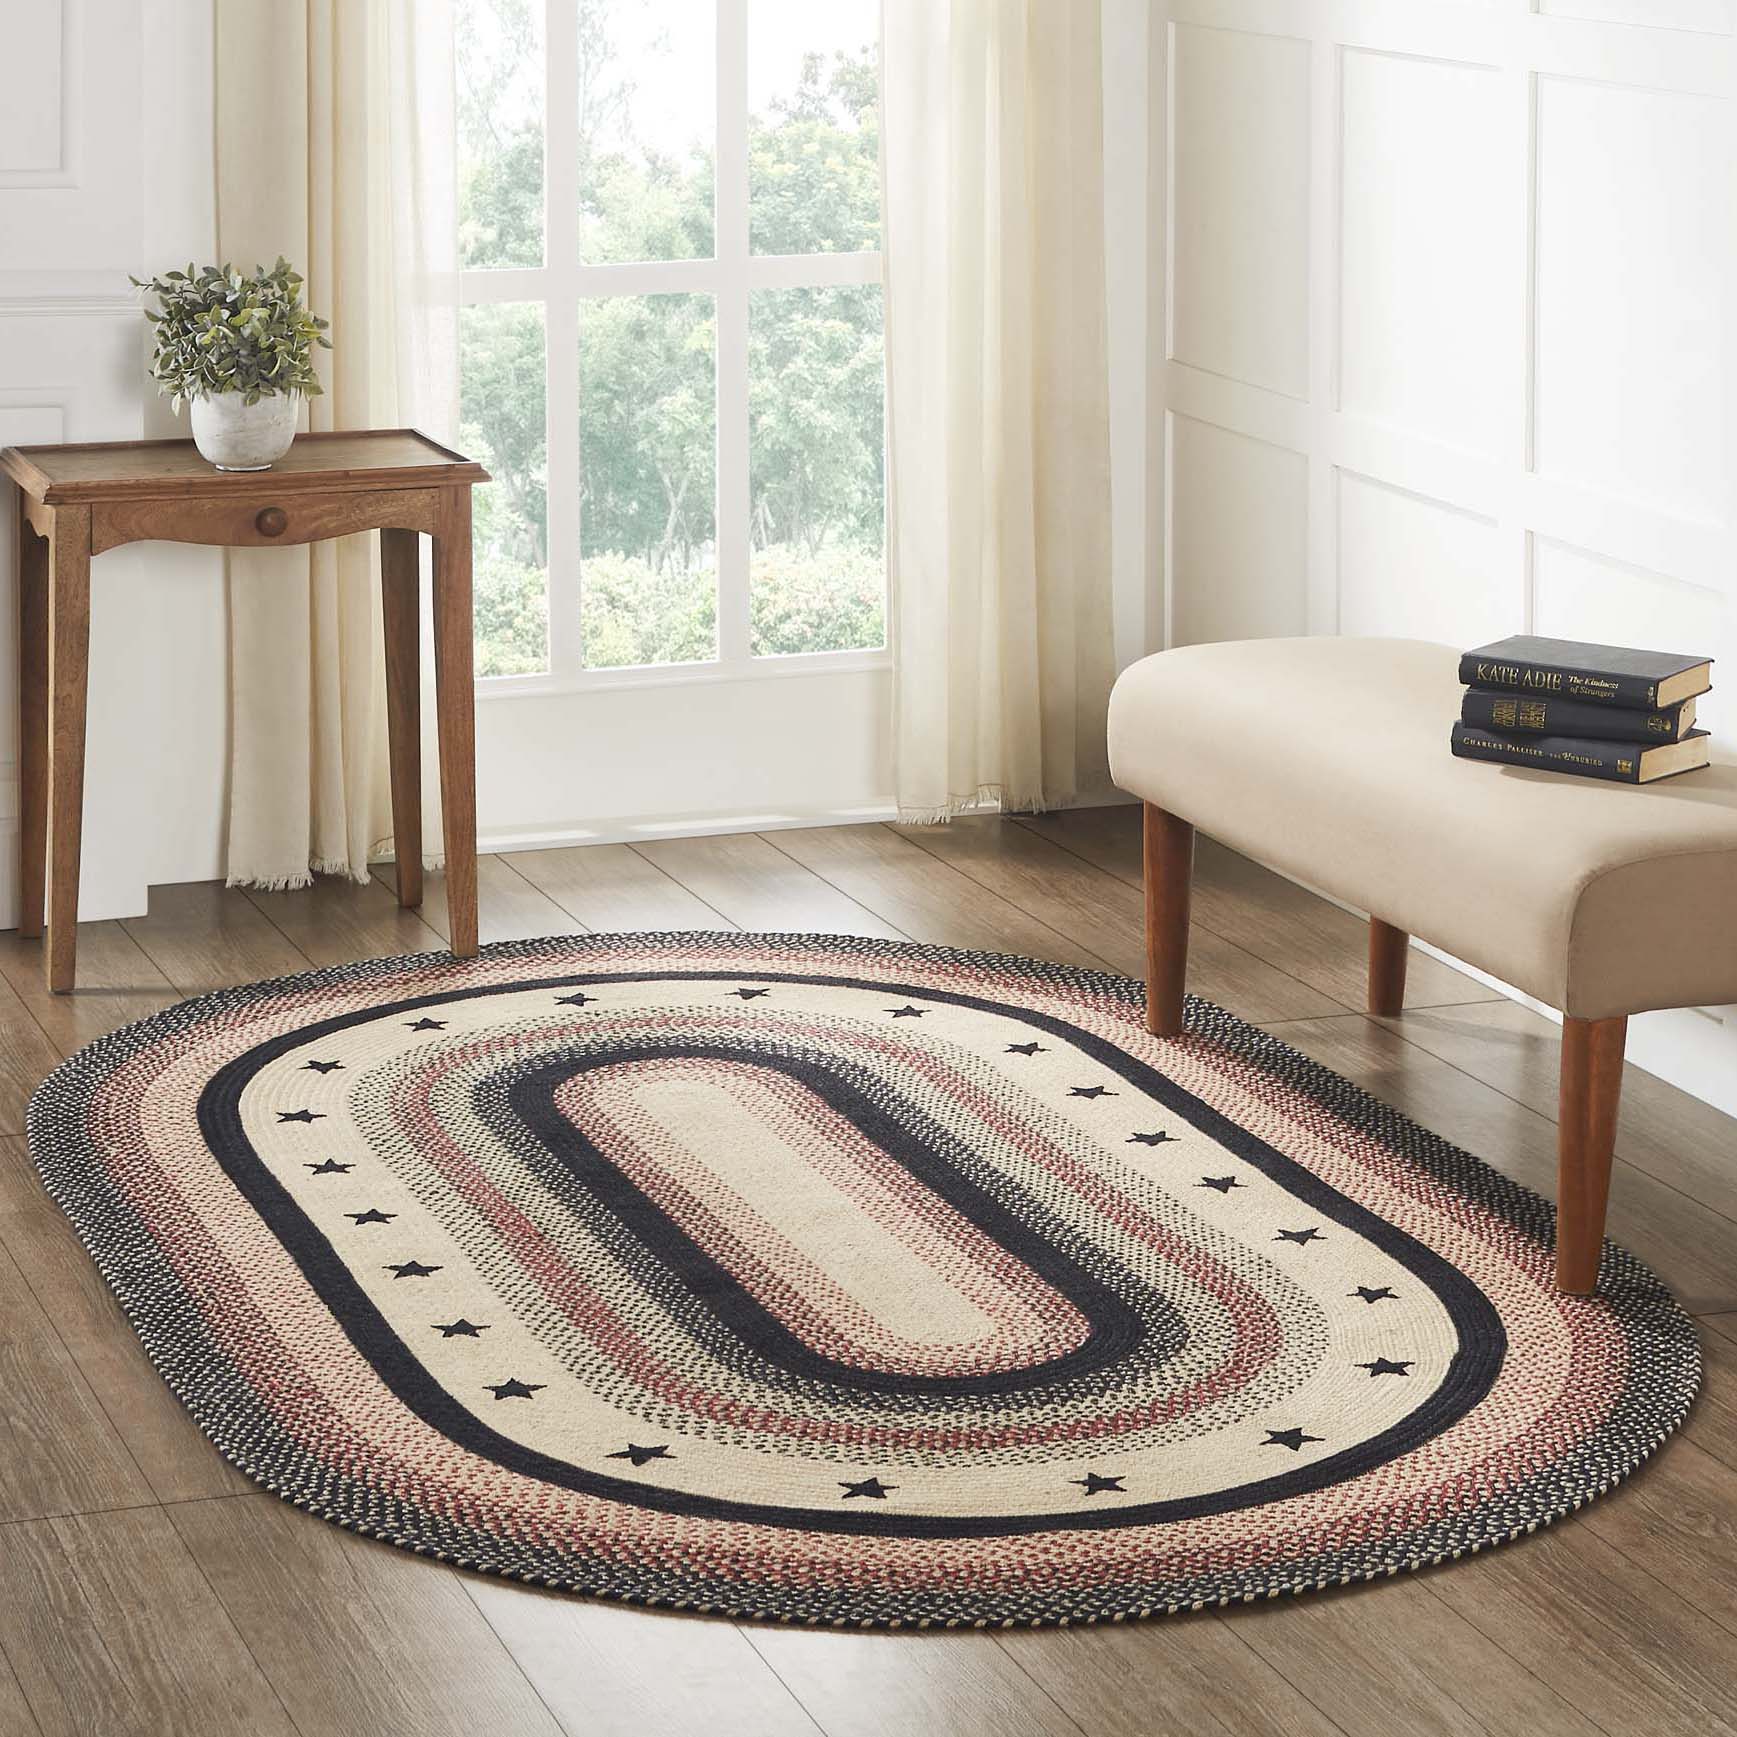 Colonial Star Collection Braided Rugs - Oval – Lange General Store